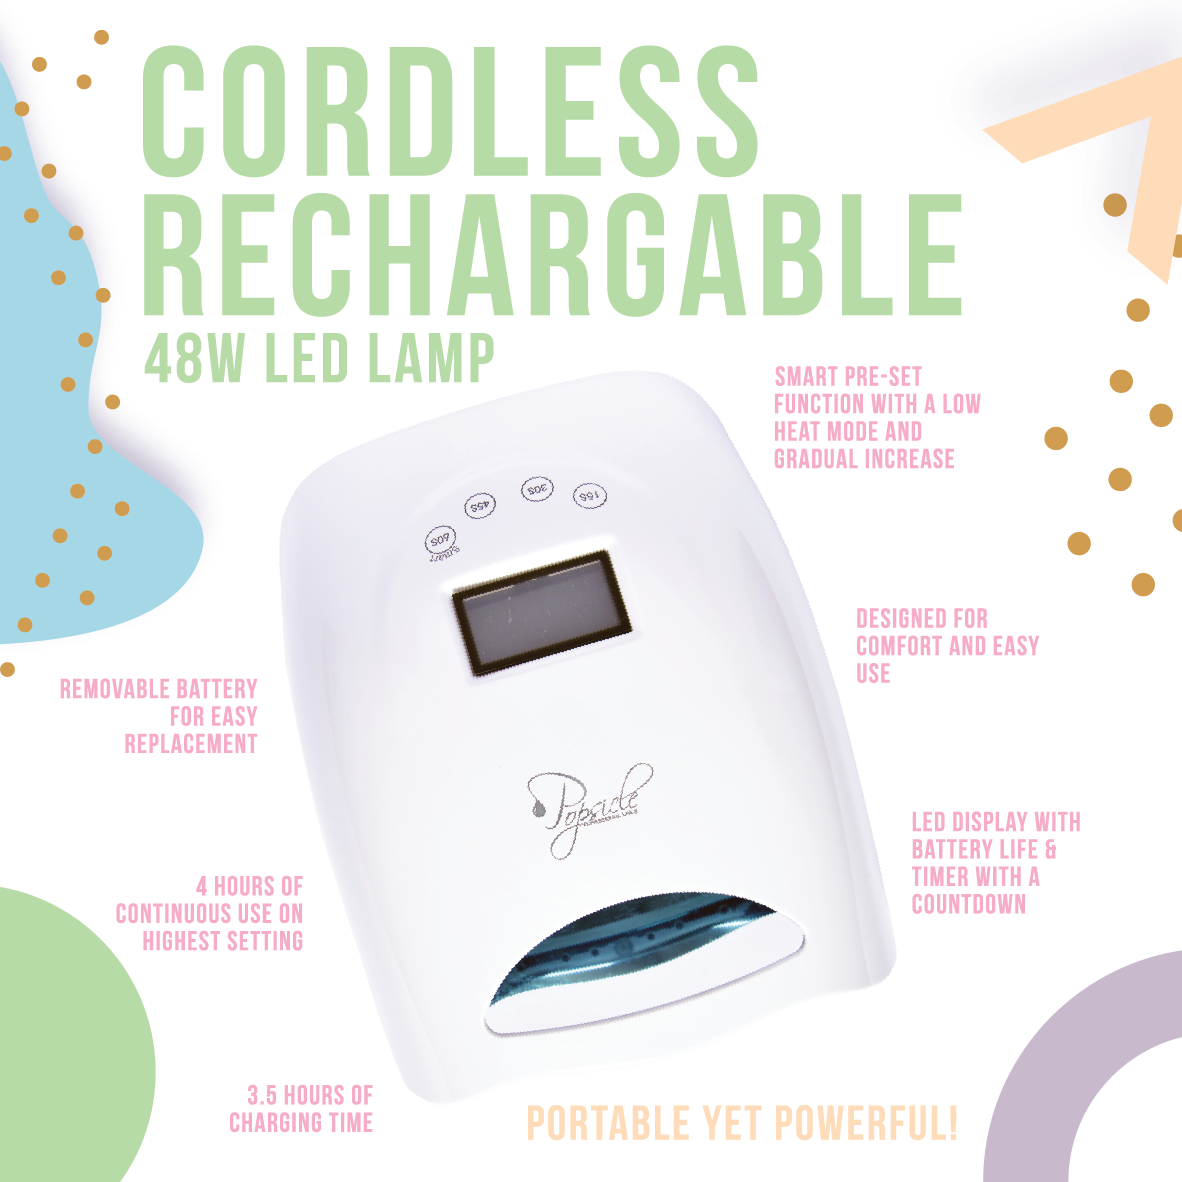 Cordless Rechargeable 48W LED Lamp